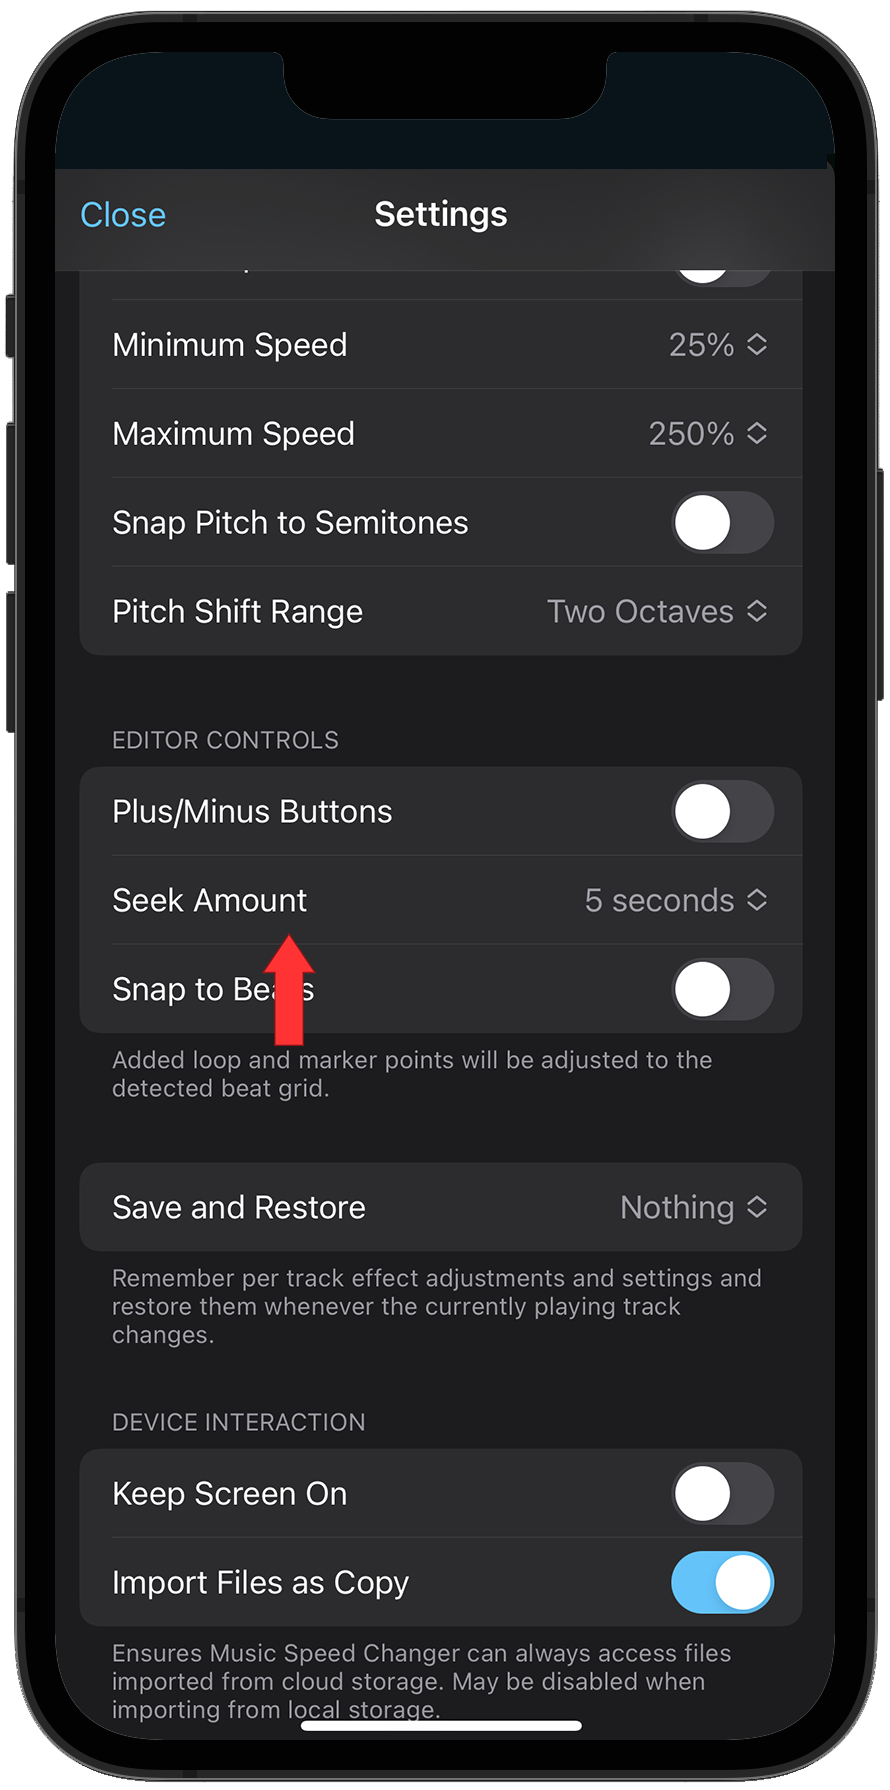 Seek amount time setting in Music Speed Changer iOS app